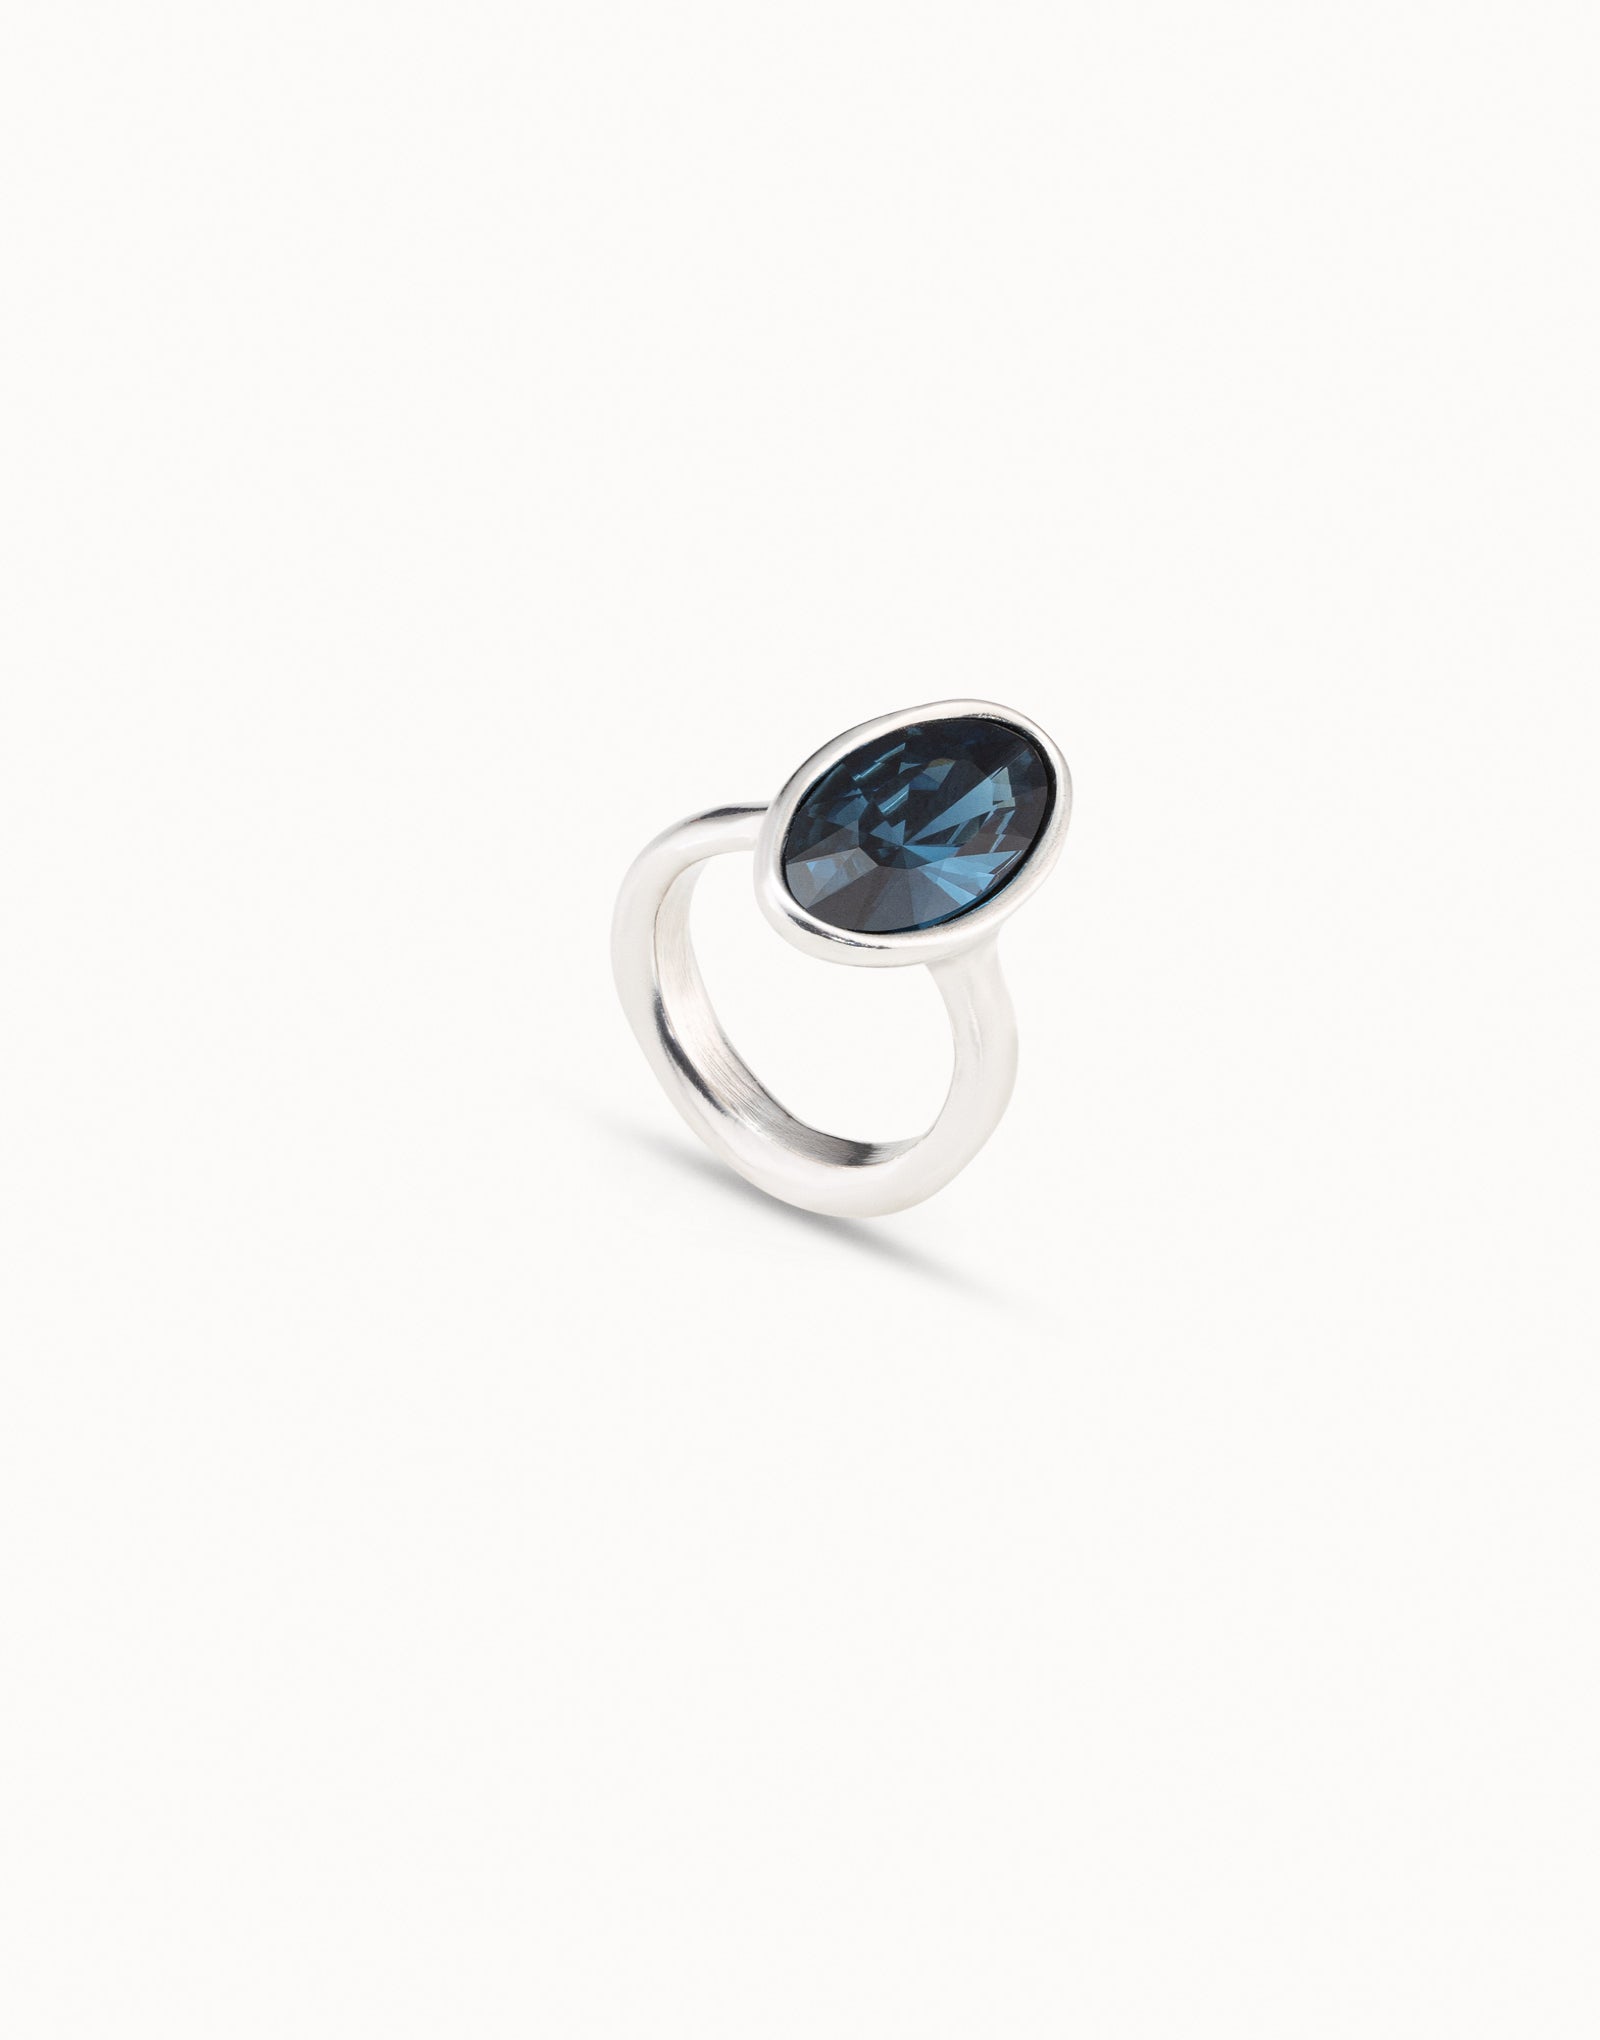 THE QUEEN RING SILVER BLUE CRYSTAL *ON SALE